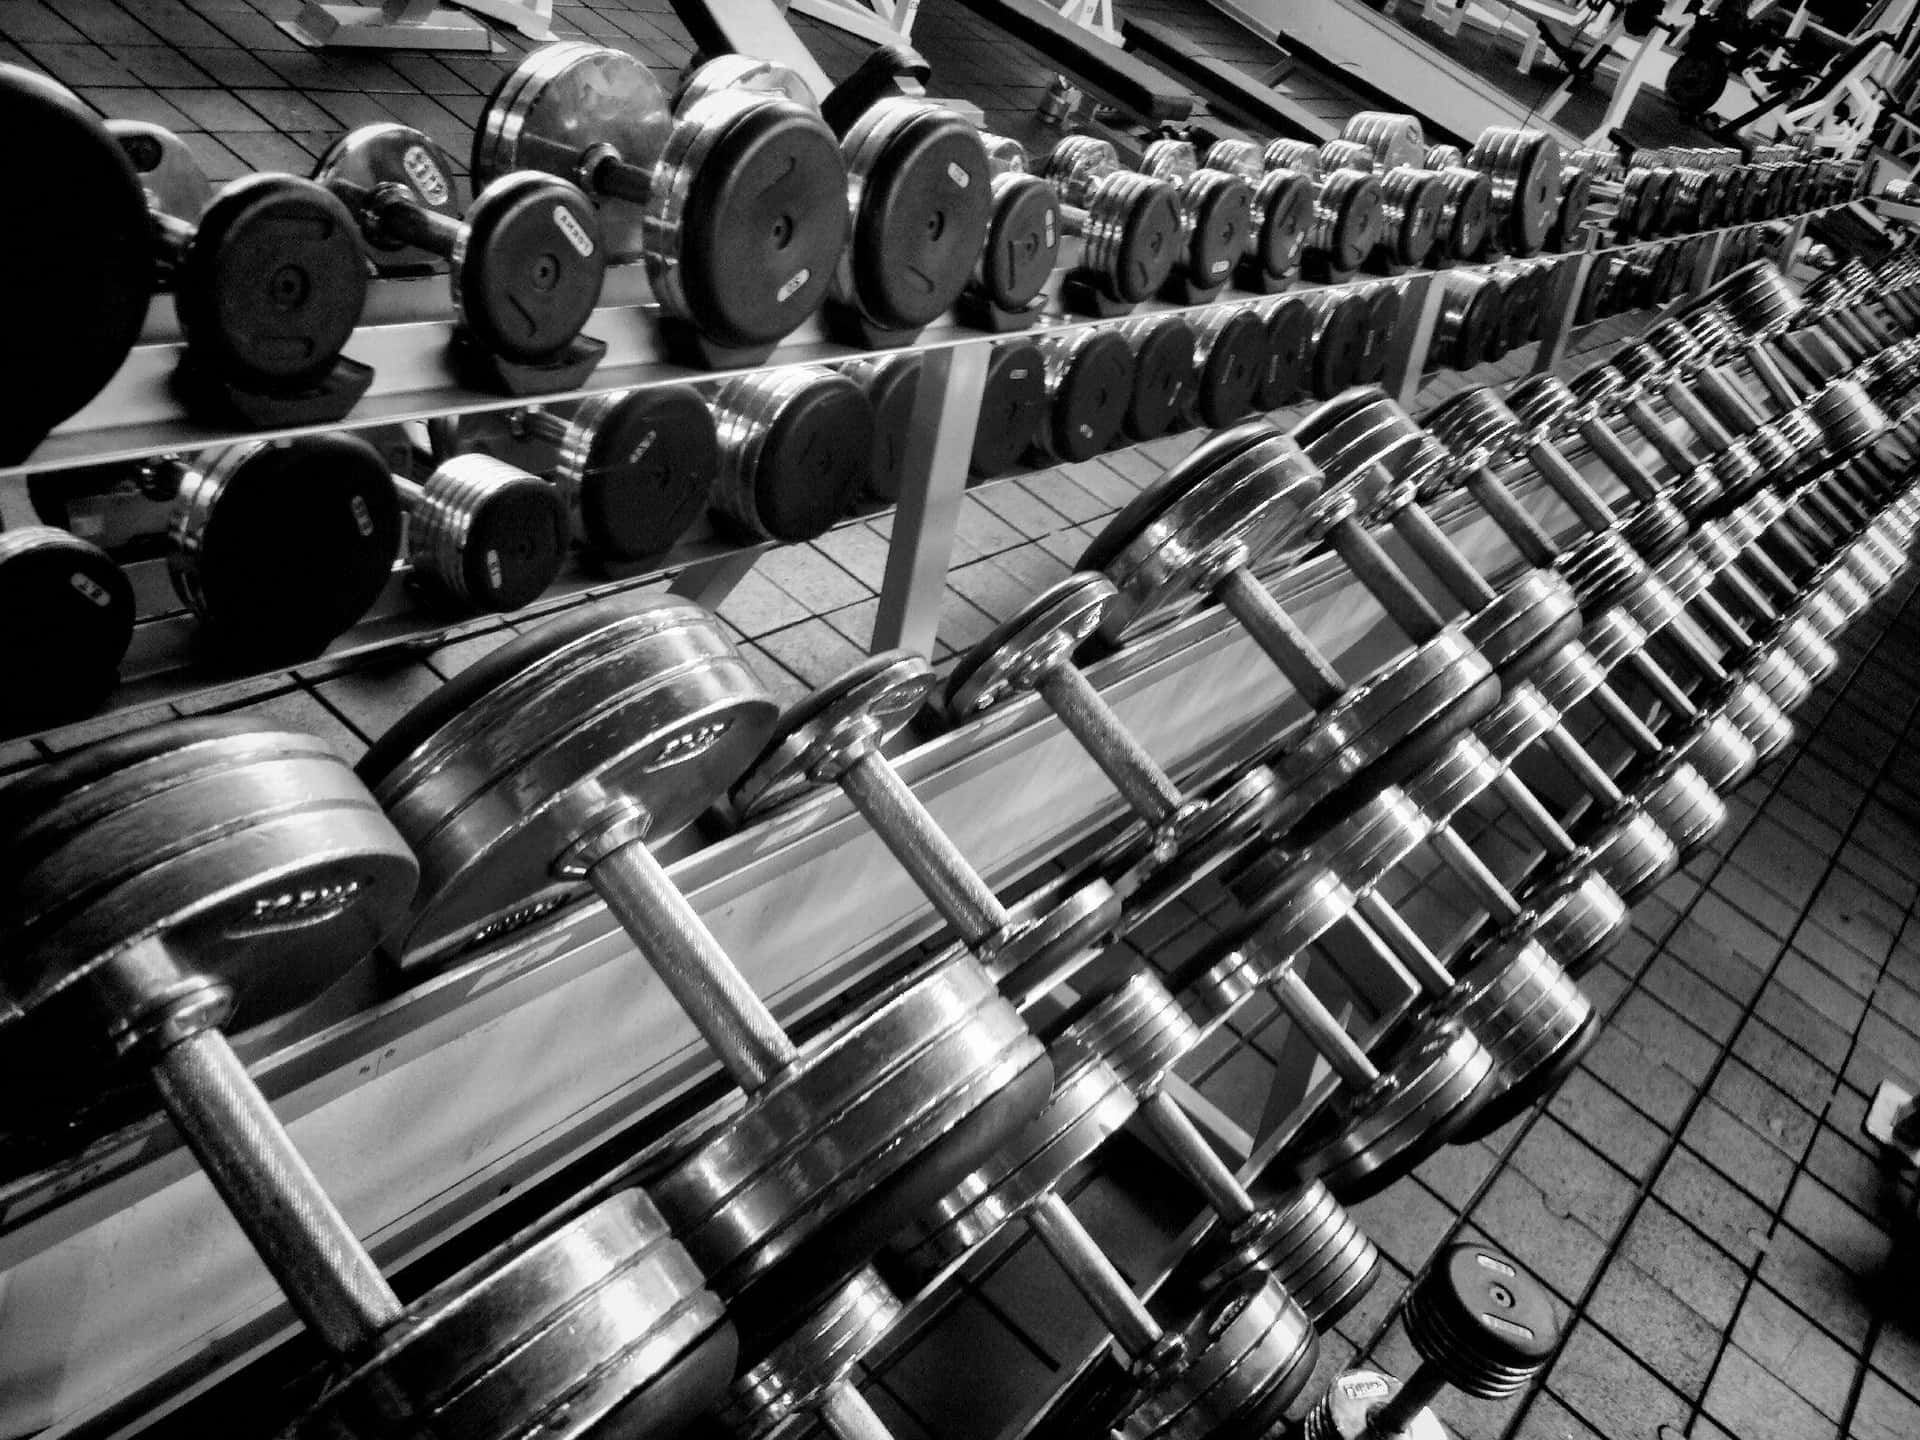 A Black And White Photo Of A Gym With Dumbbells